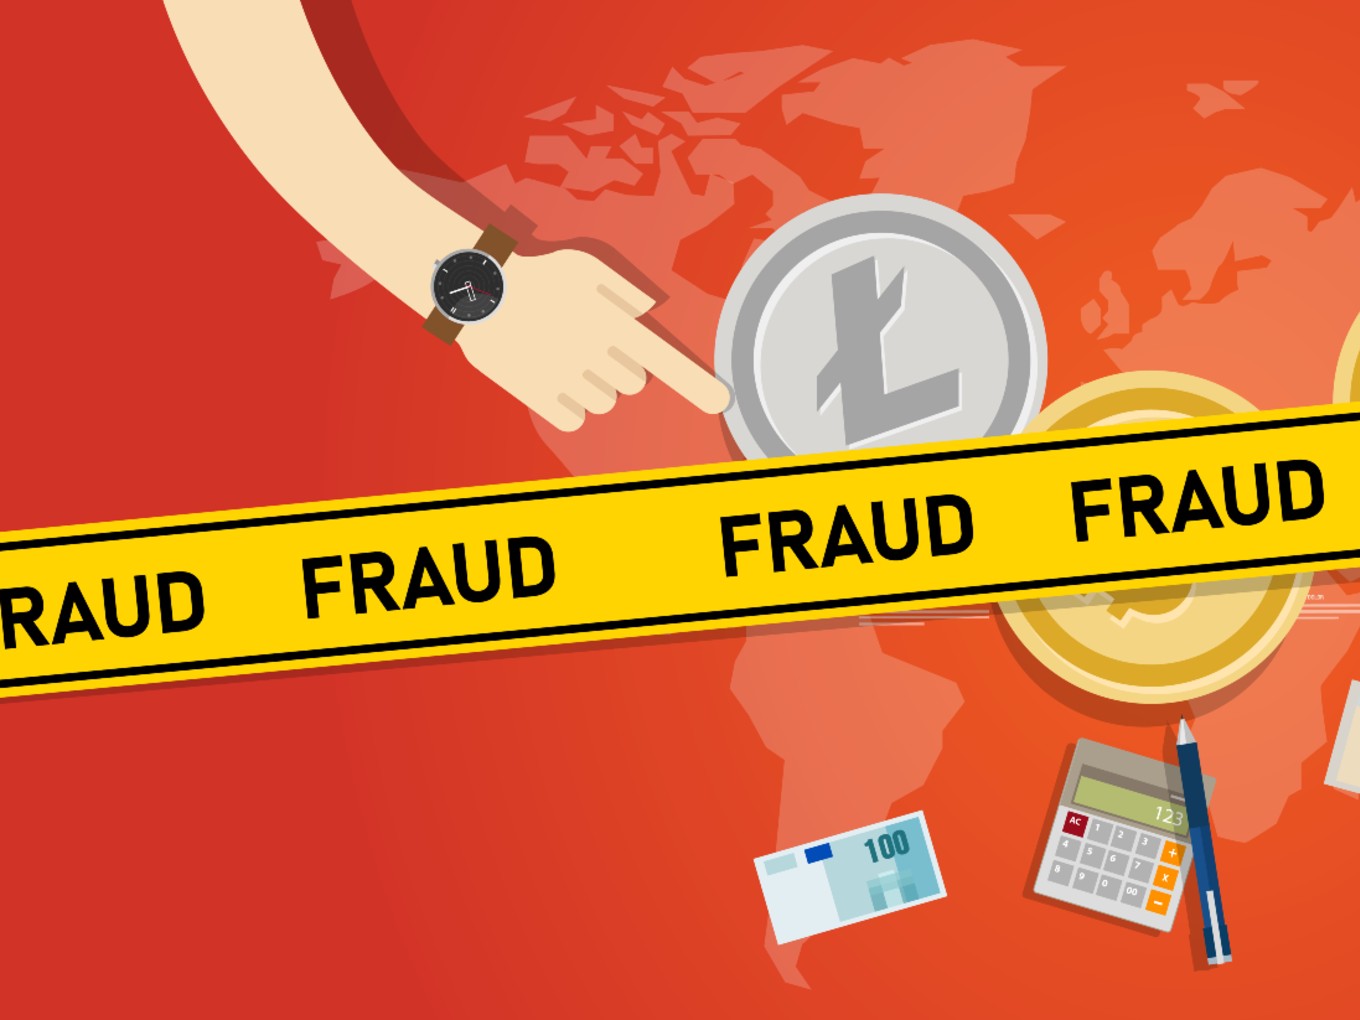 Bengaluru Police Busts Another Crypto-Related Ponzi Scheme, Arrests Founder For Duping 2K People